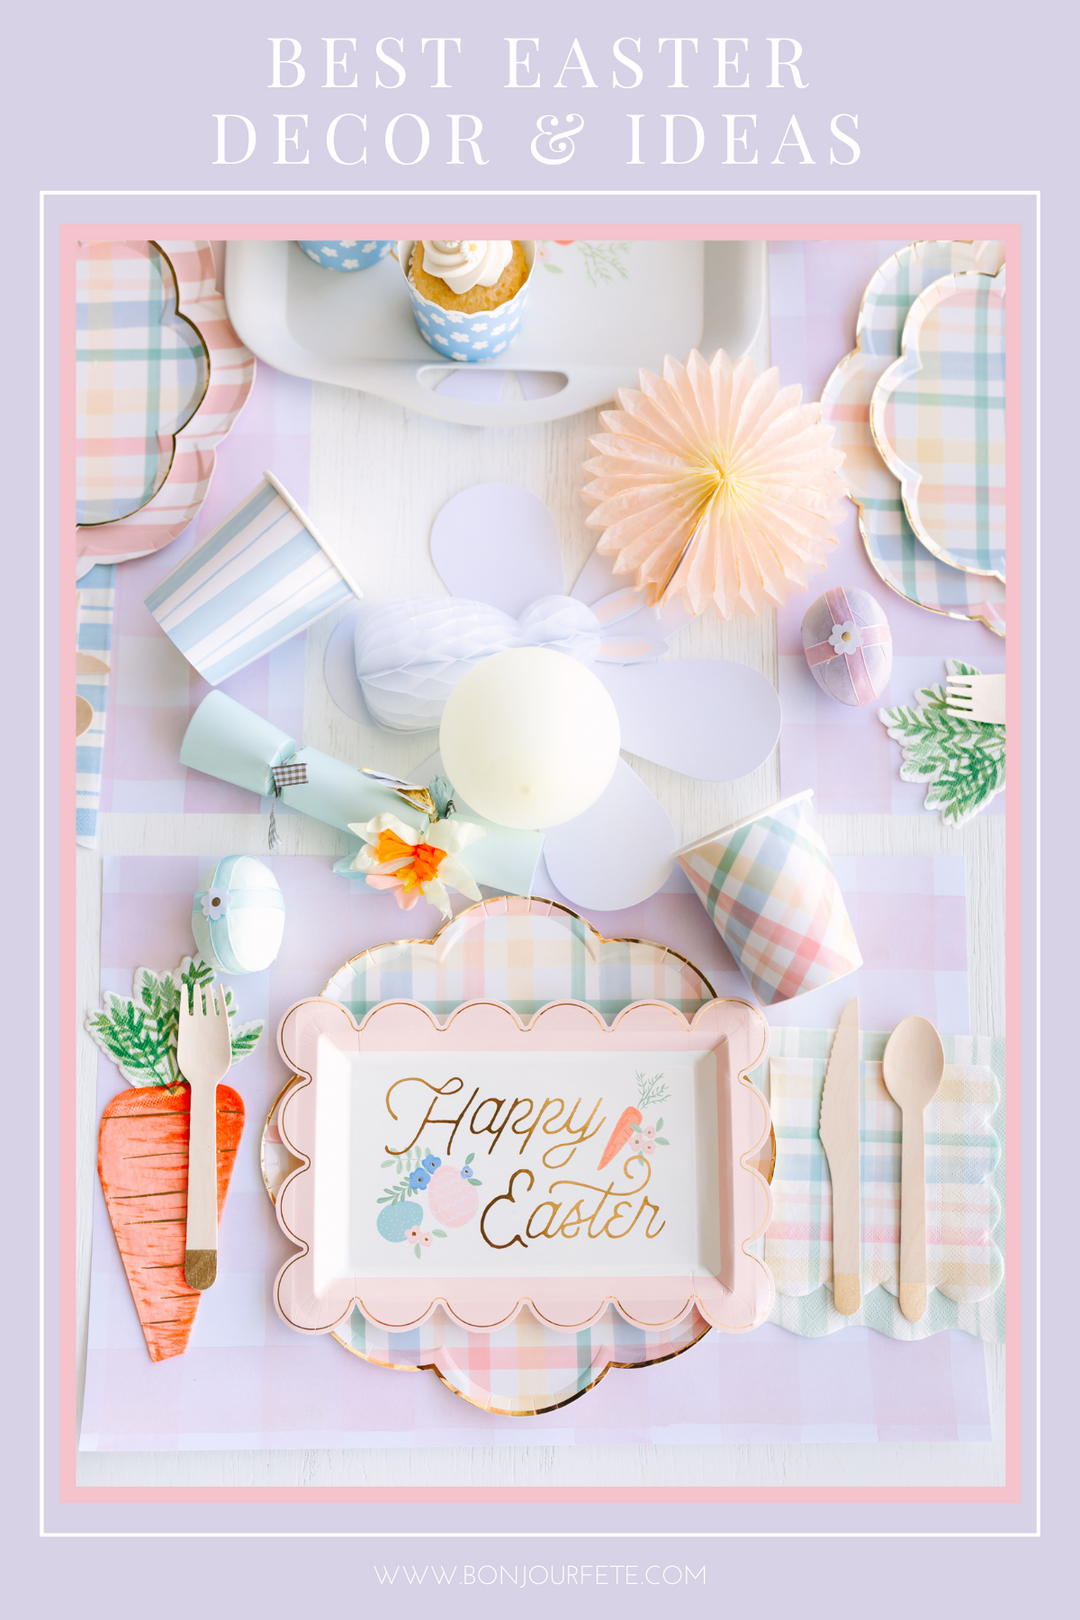 BEST EASTER TABLESCAPES, DECORATIONS, & PARTY IDEAS